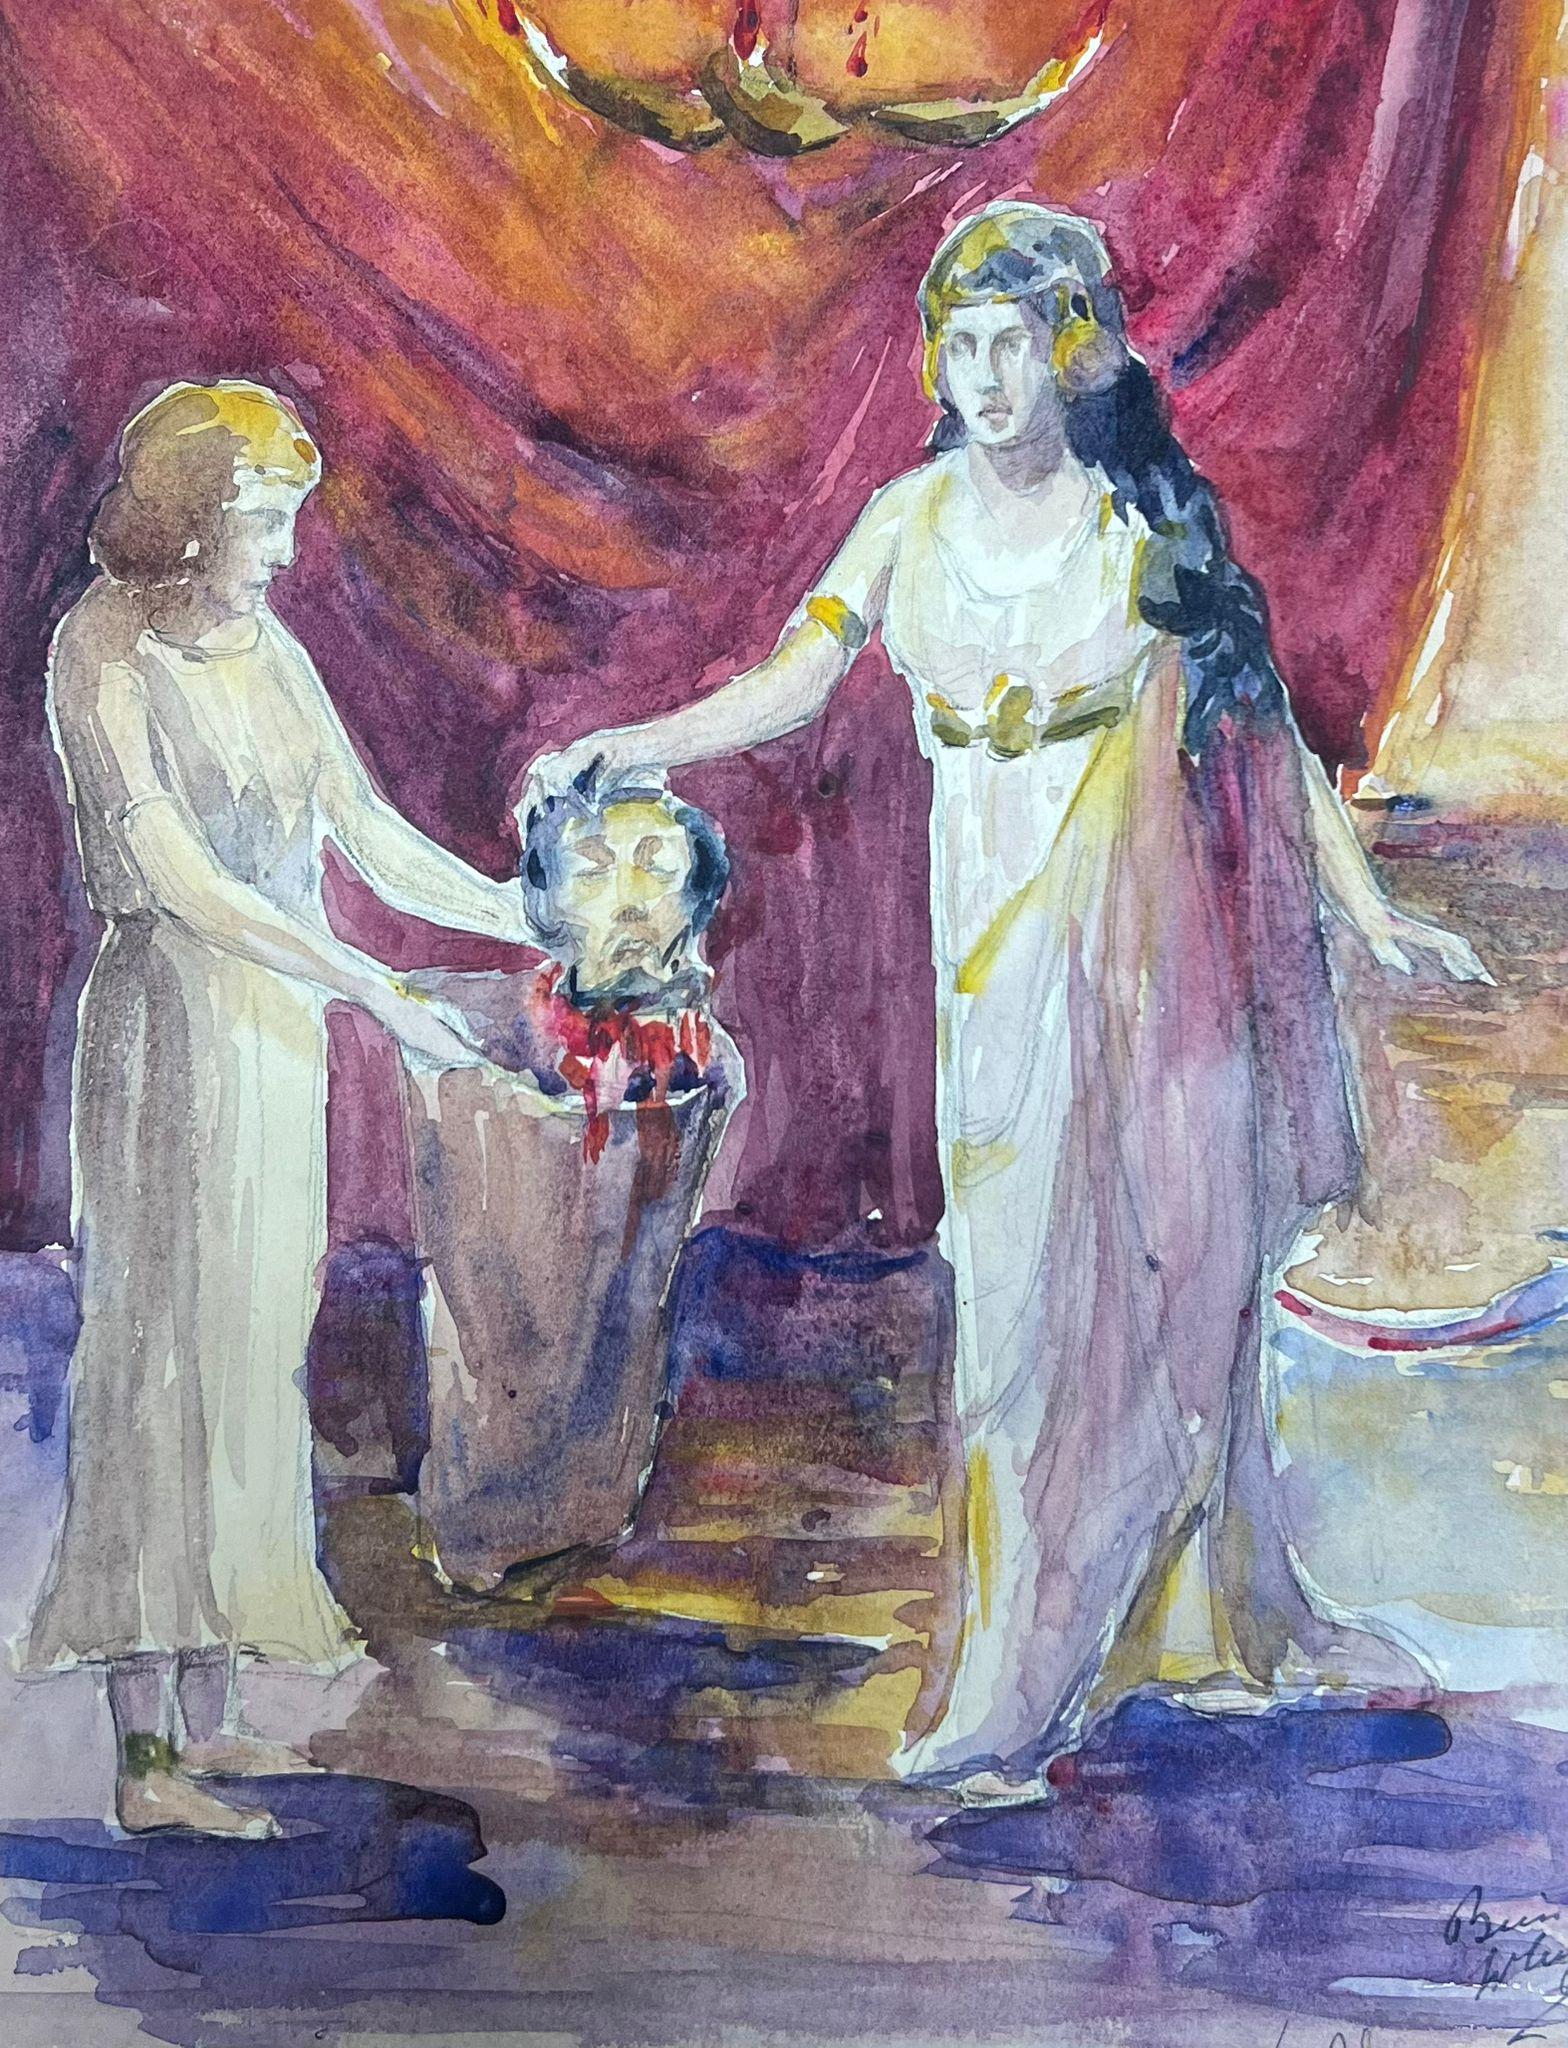 1930's French Impressionist Female Figures Holding Beheaded Head - Painting by Louise Alix